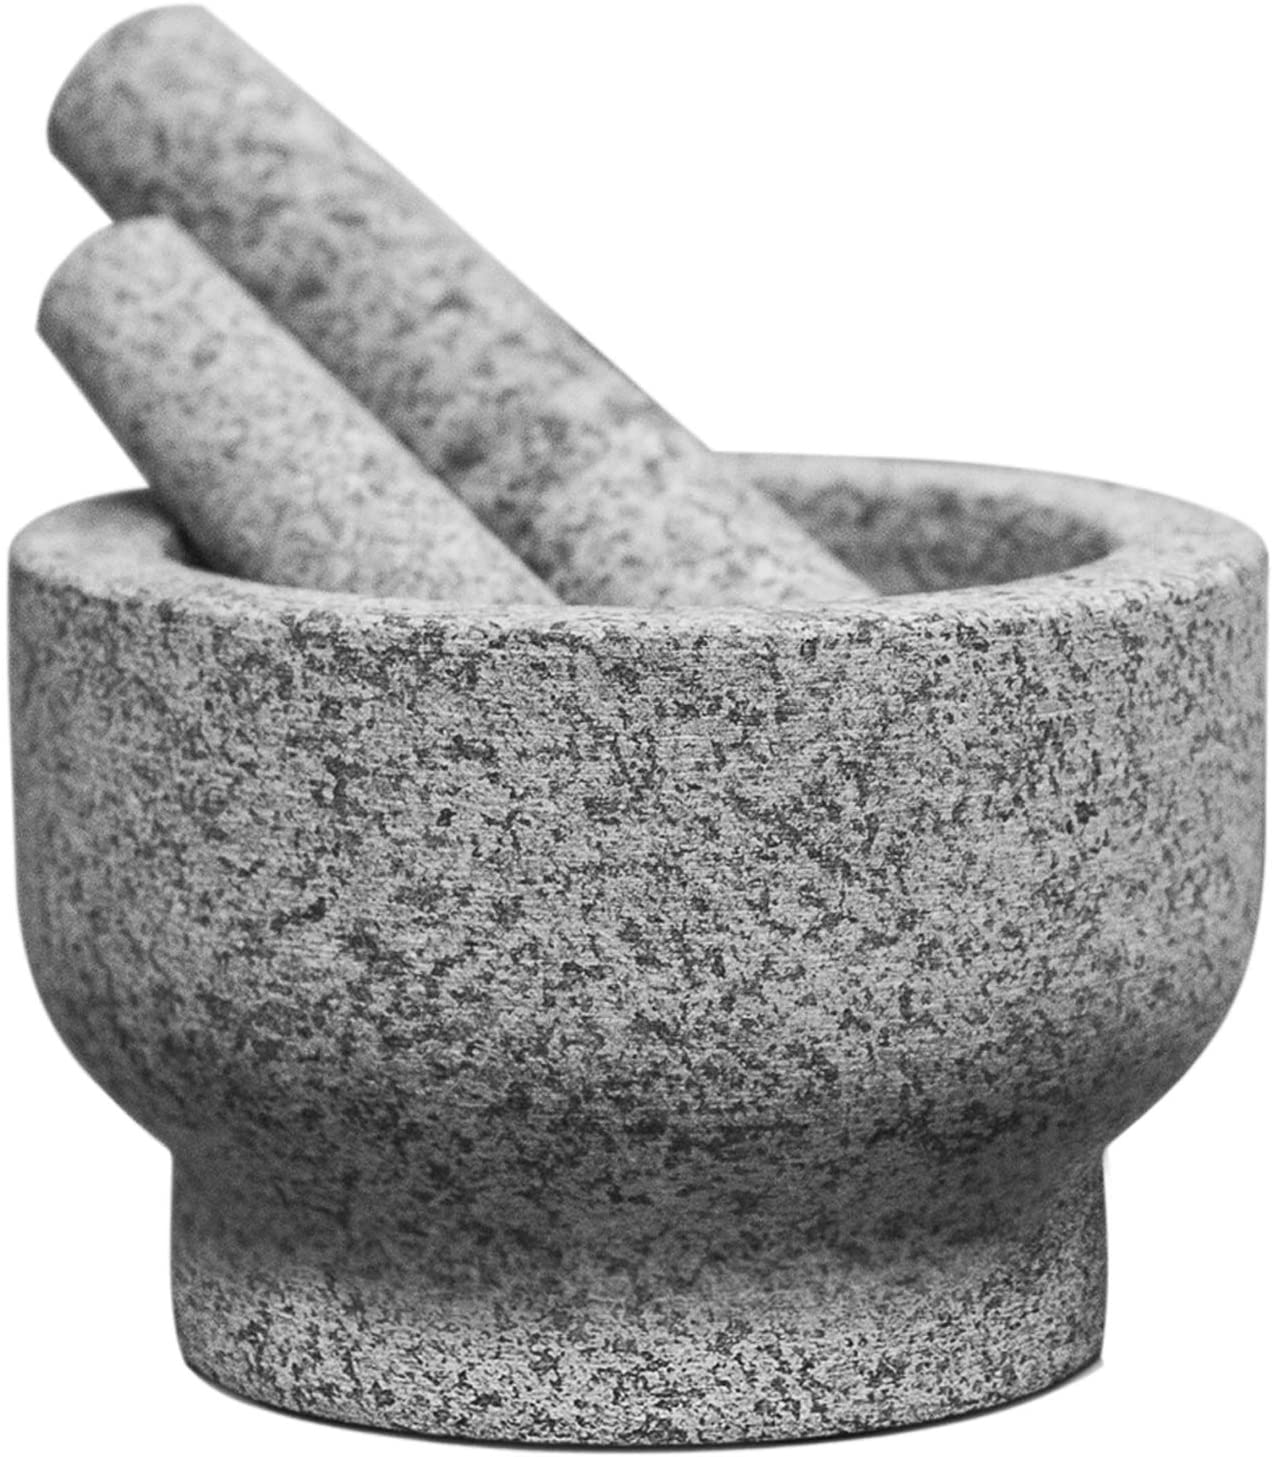 What Kind of Mortar And Pestle Does Gordon Ramsay Use